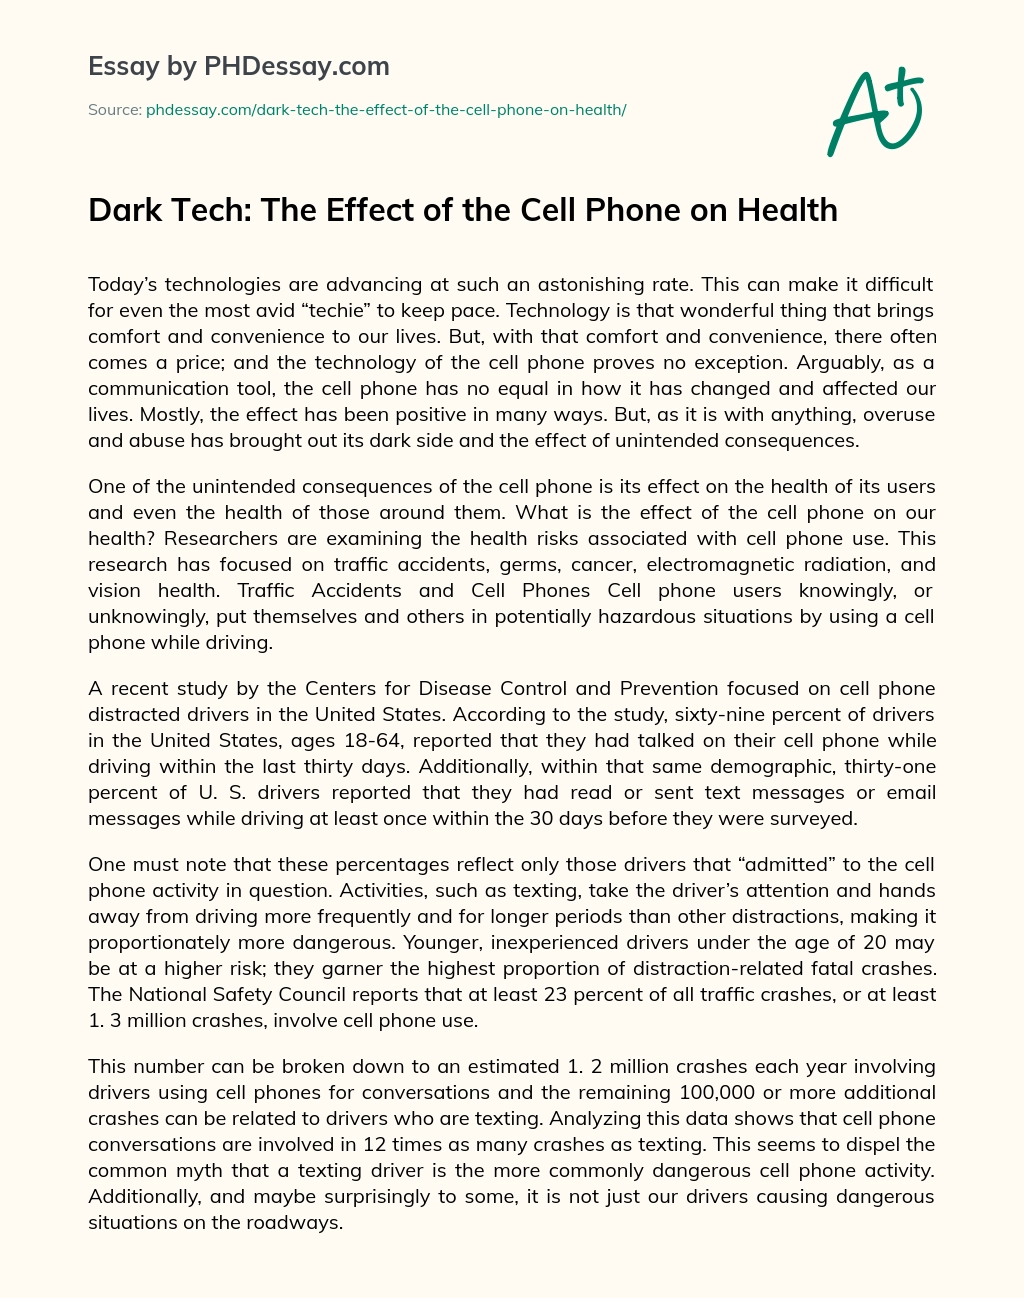 Dark Tech: The Effect of the Cell Phone on Health essay